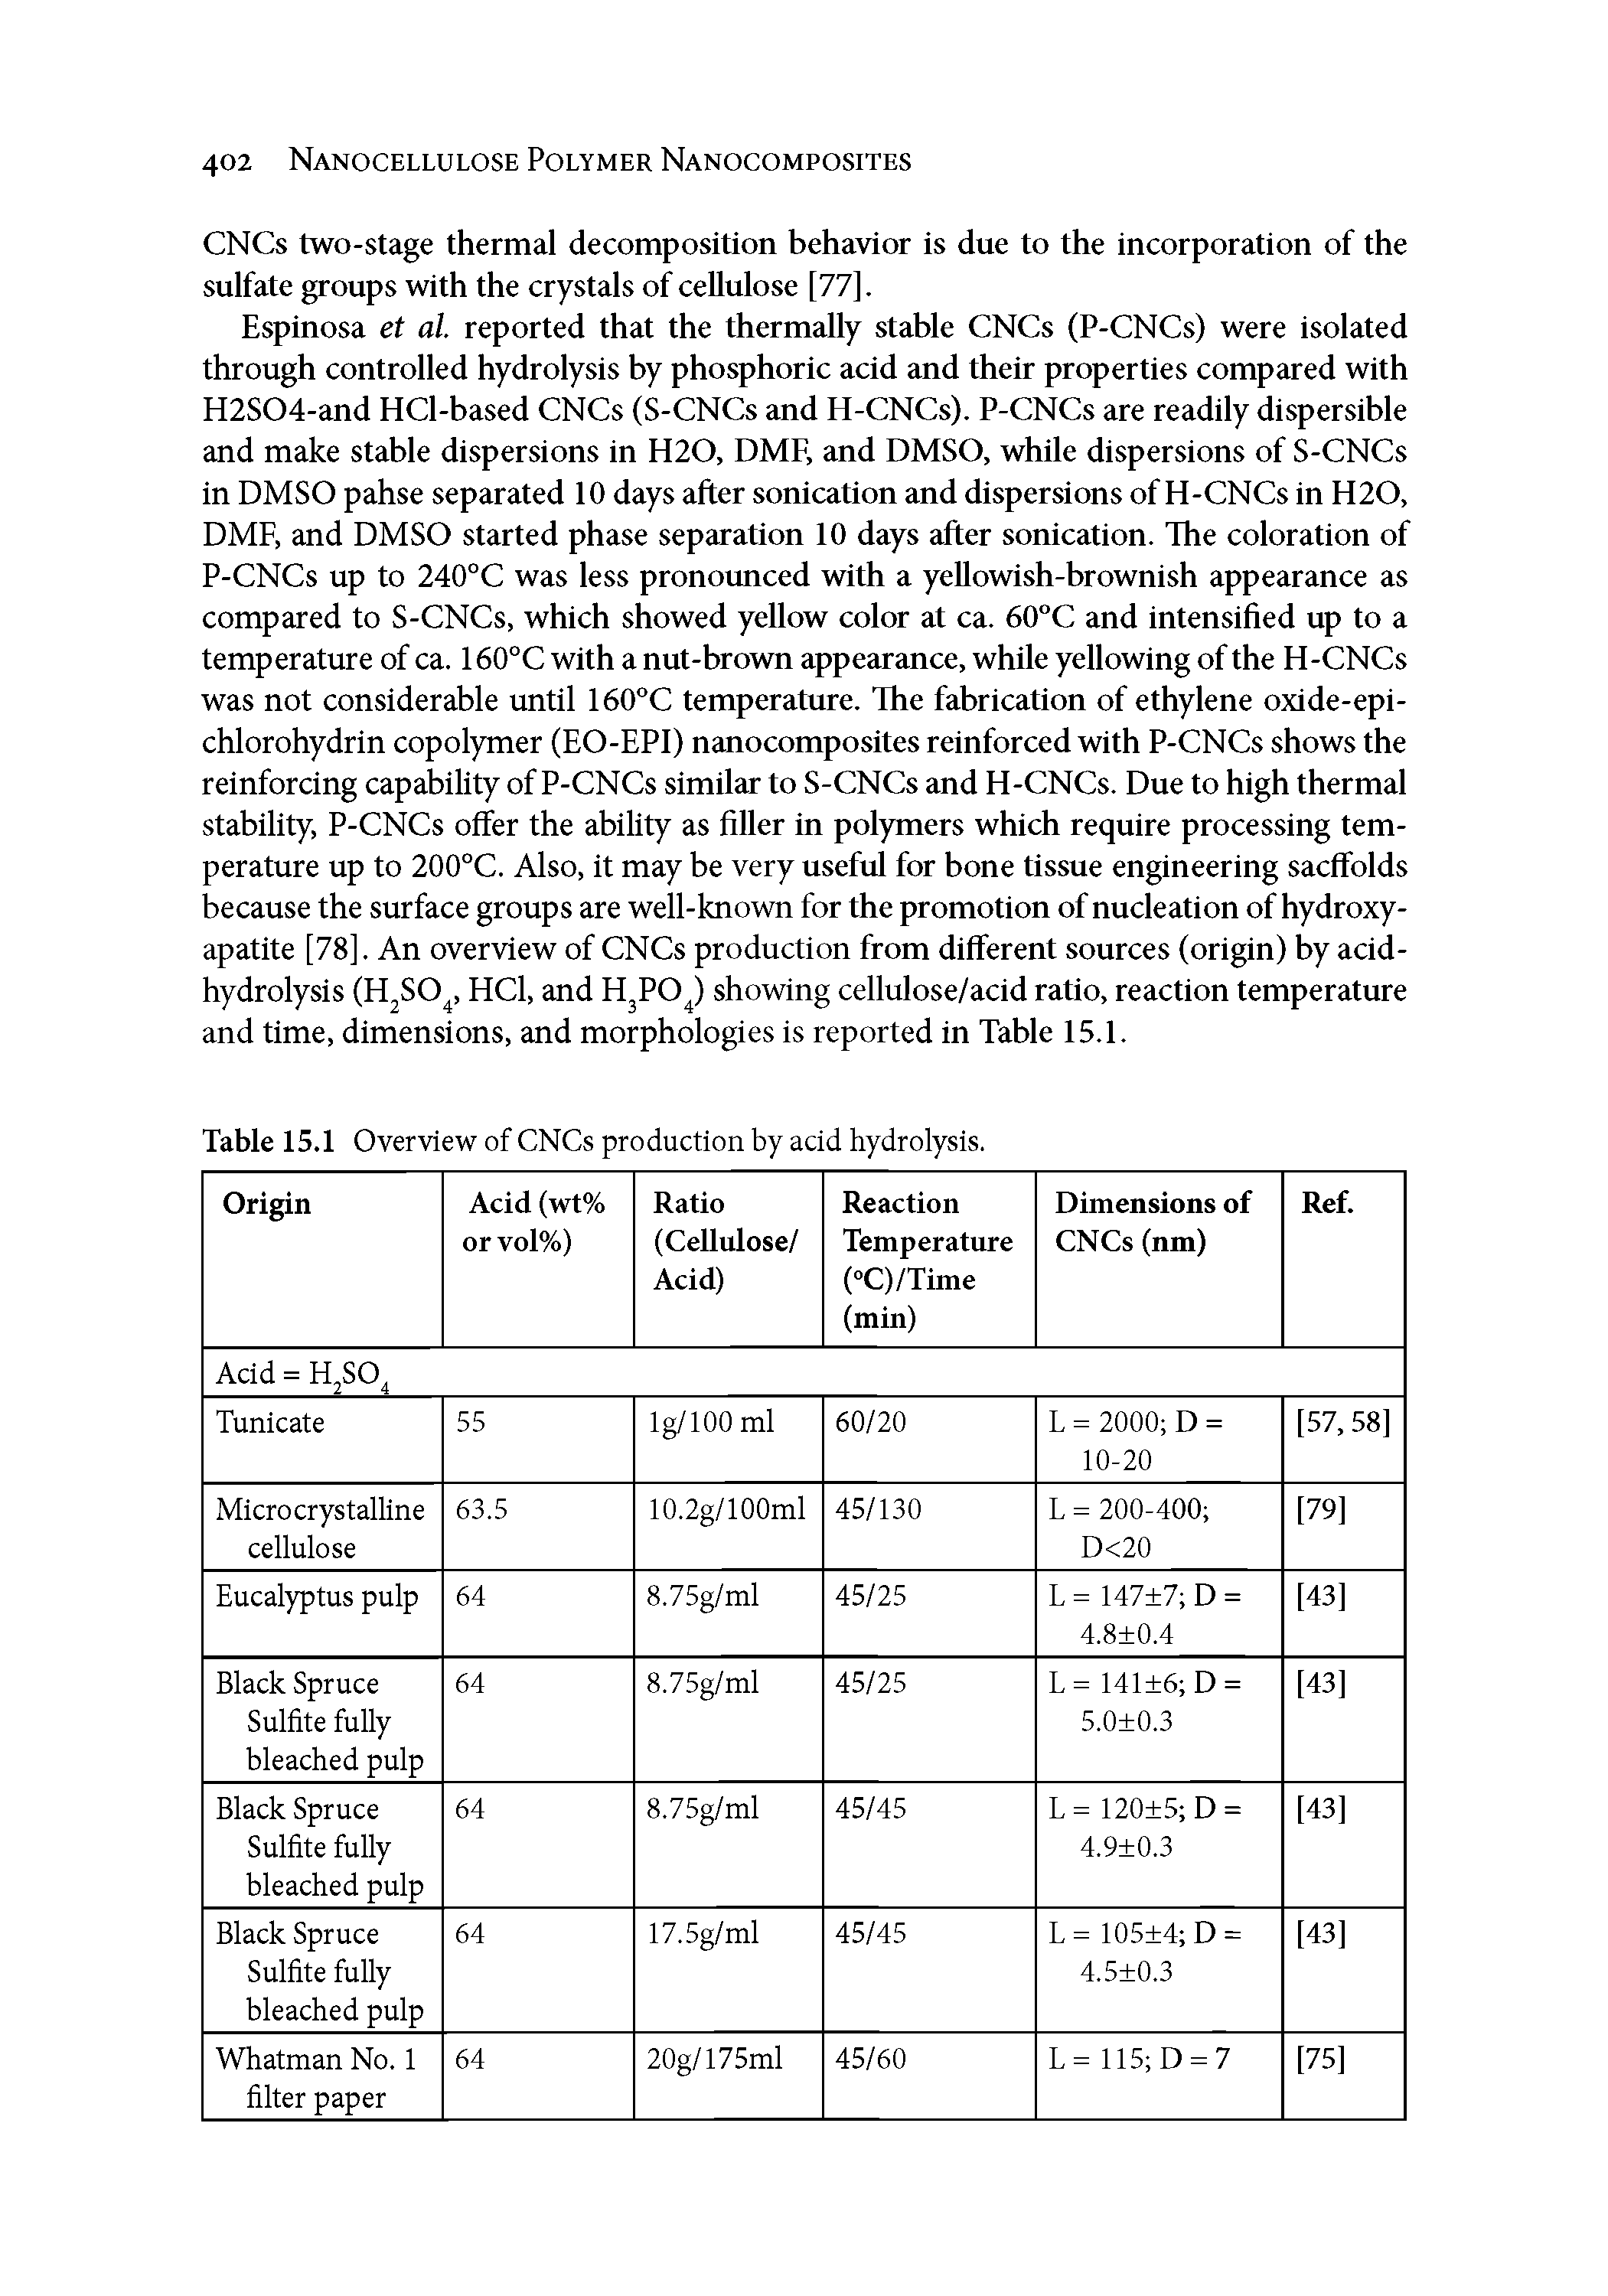 Table 15.1 Overview of CNCs production by acid hydrolysis.